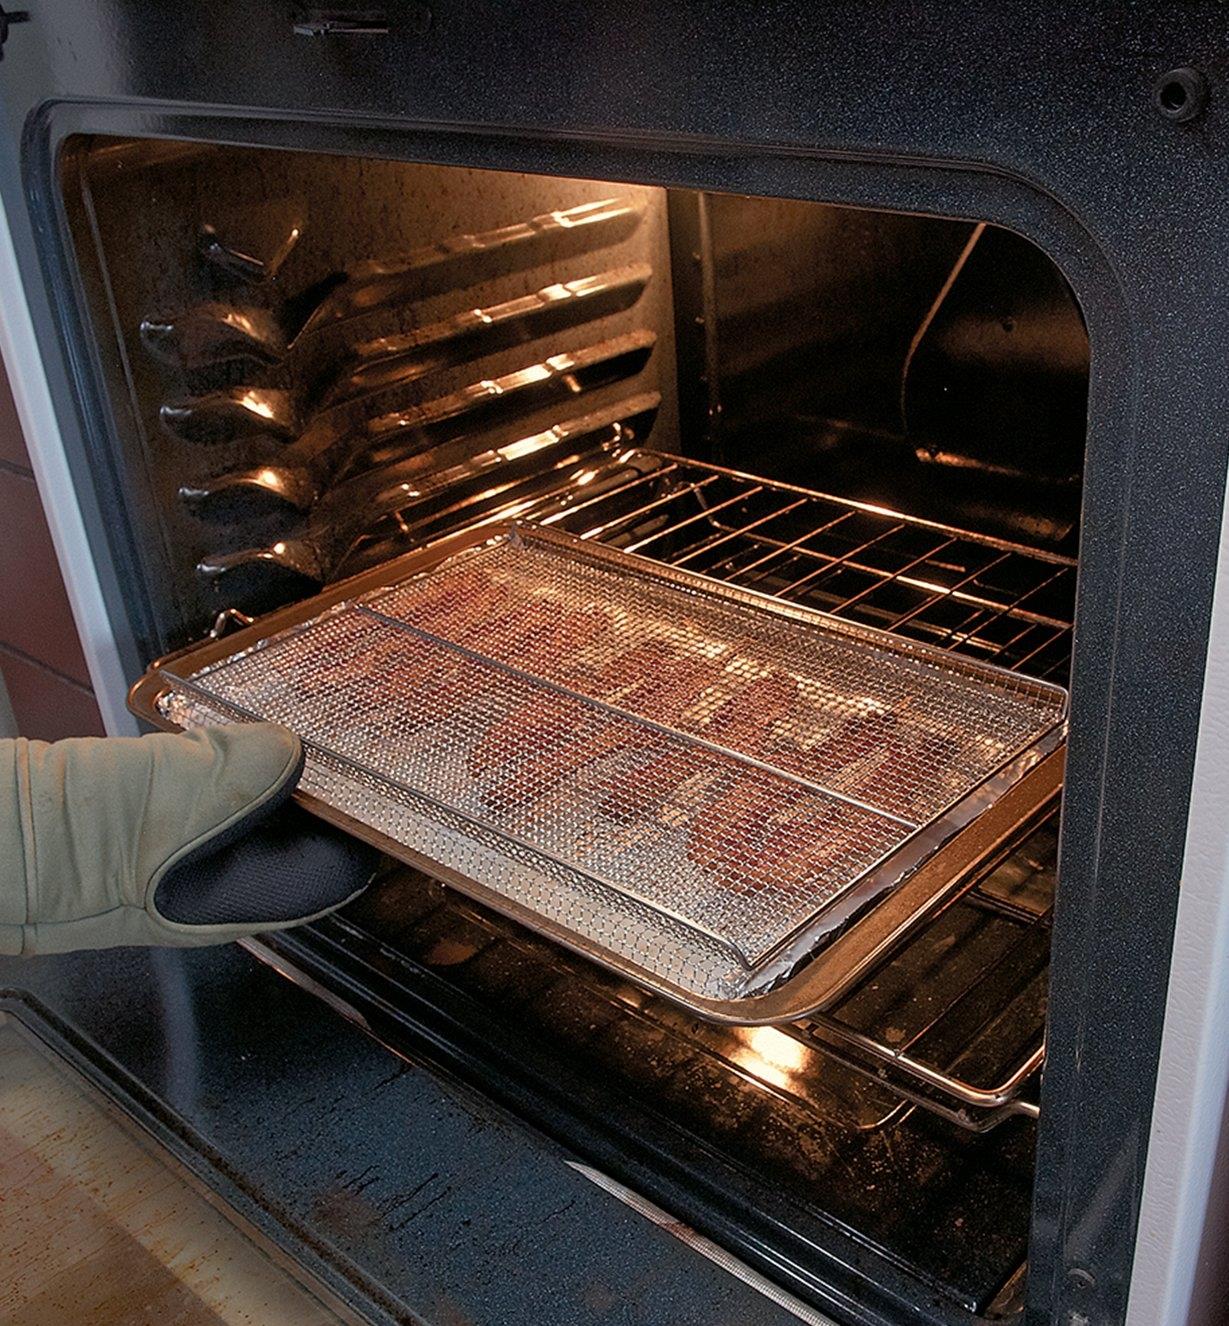 Cooking bacon in an oven using a Cookie/Bacon Rack